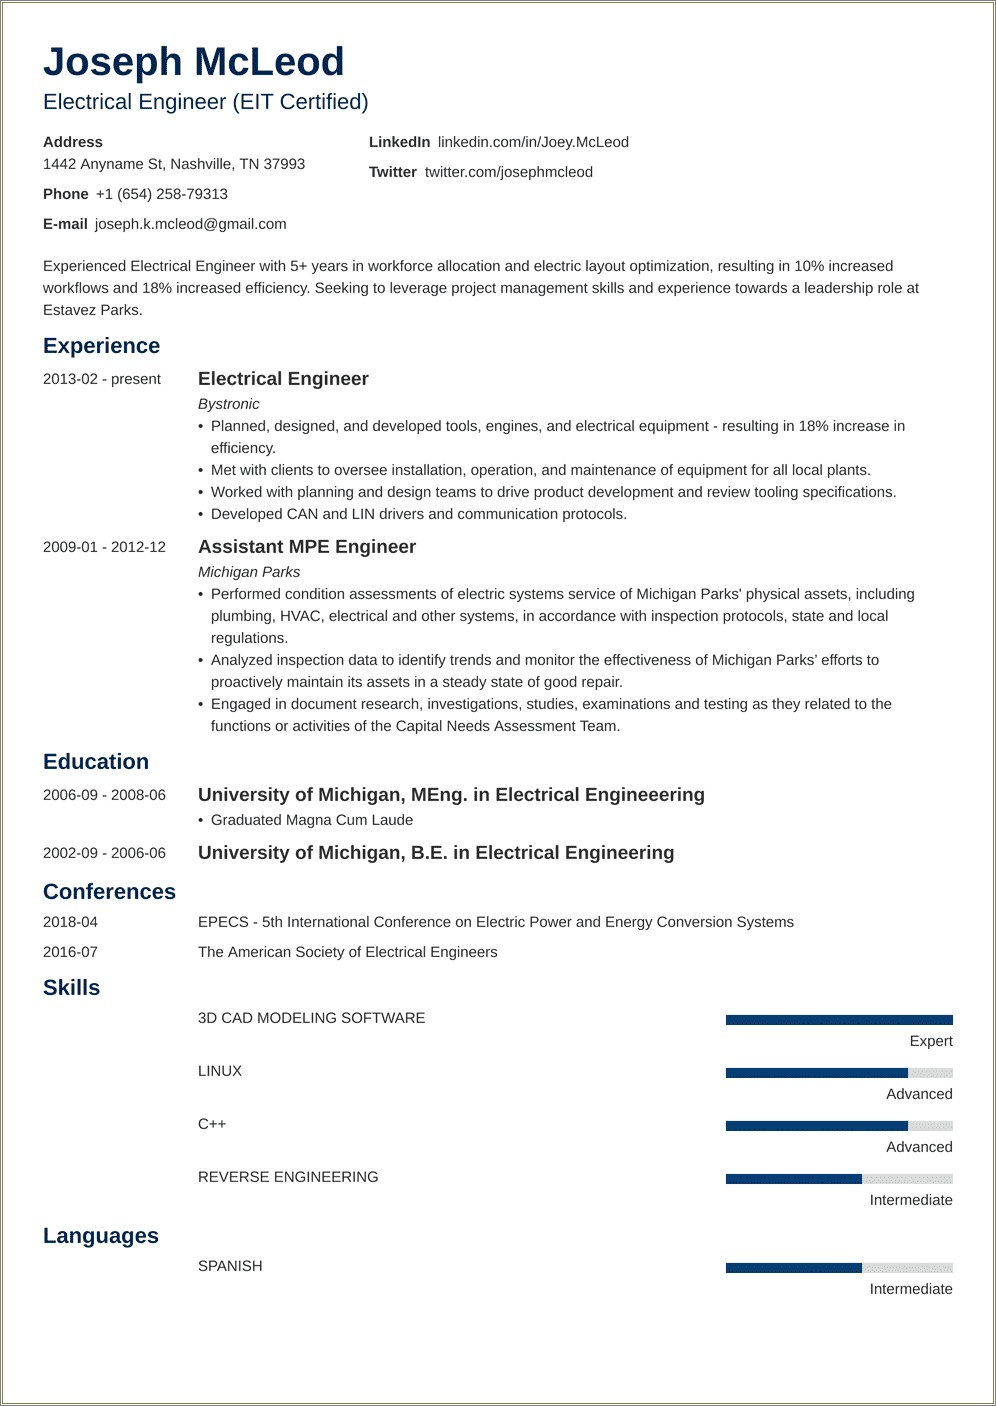 Objective For Fresher Resume In Electrical Engineering